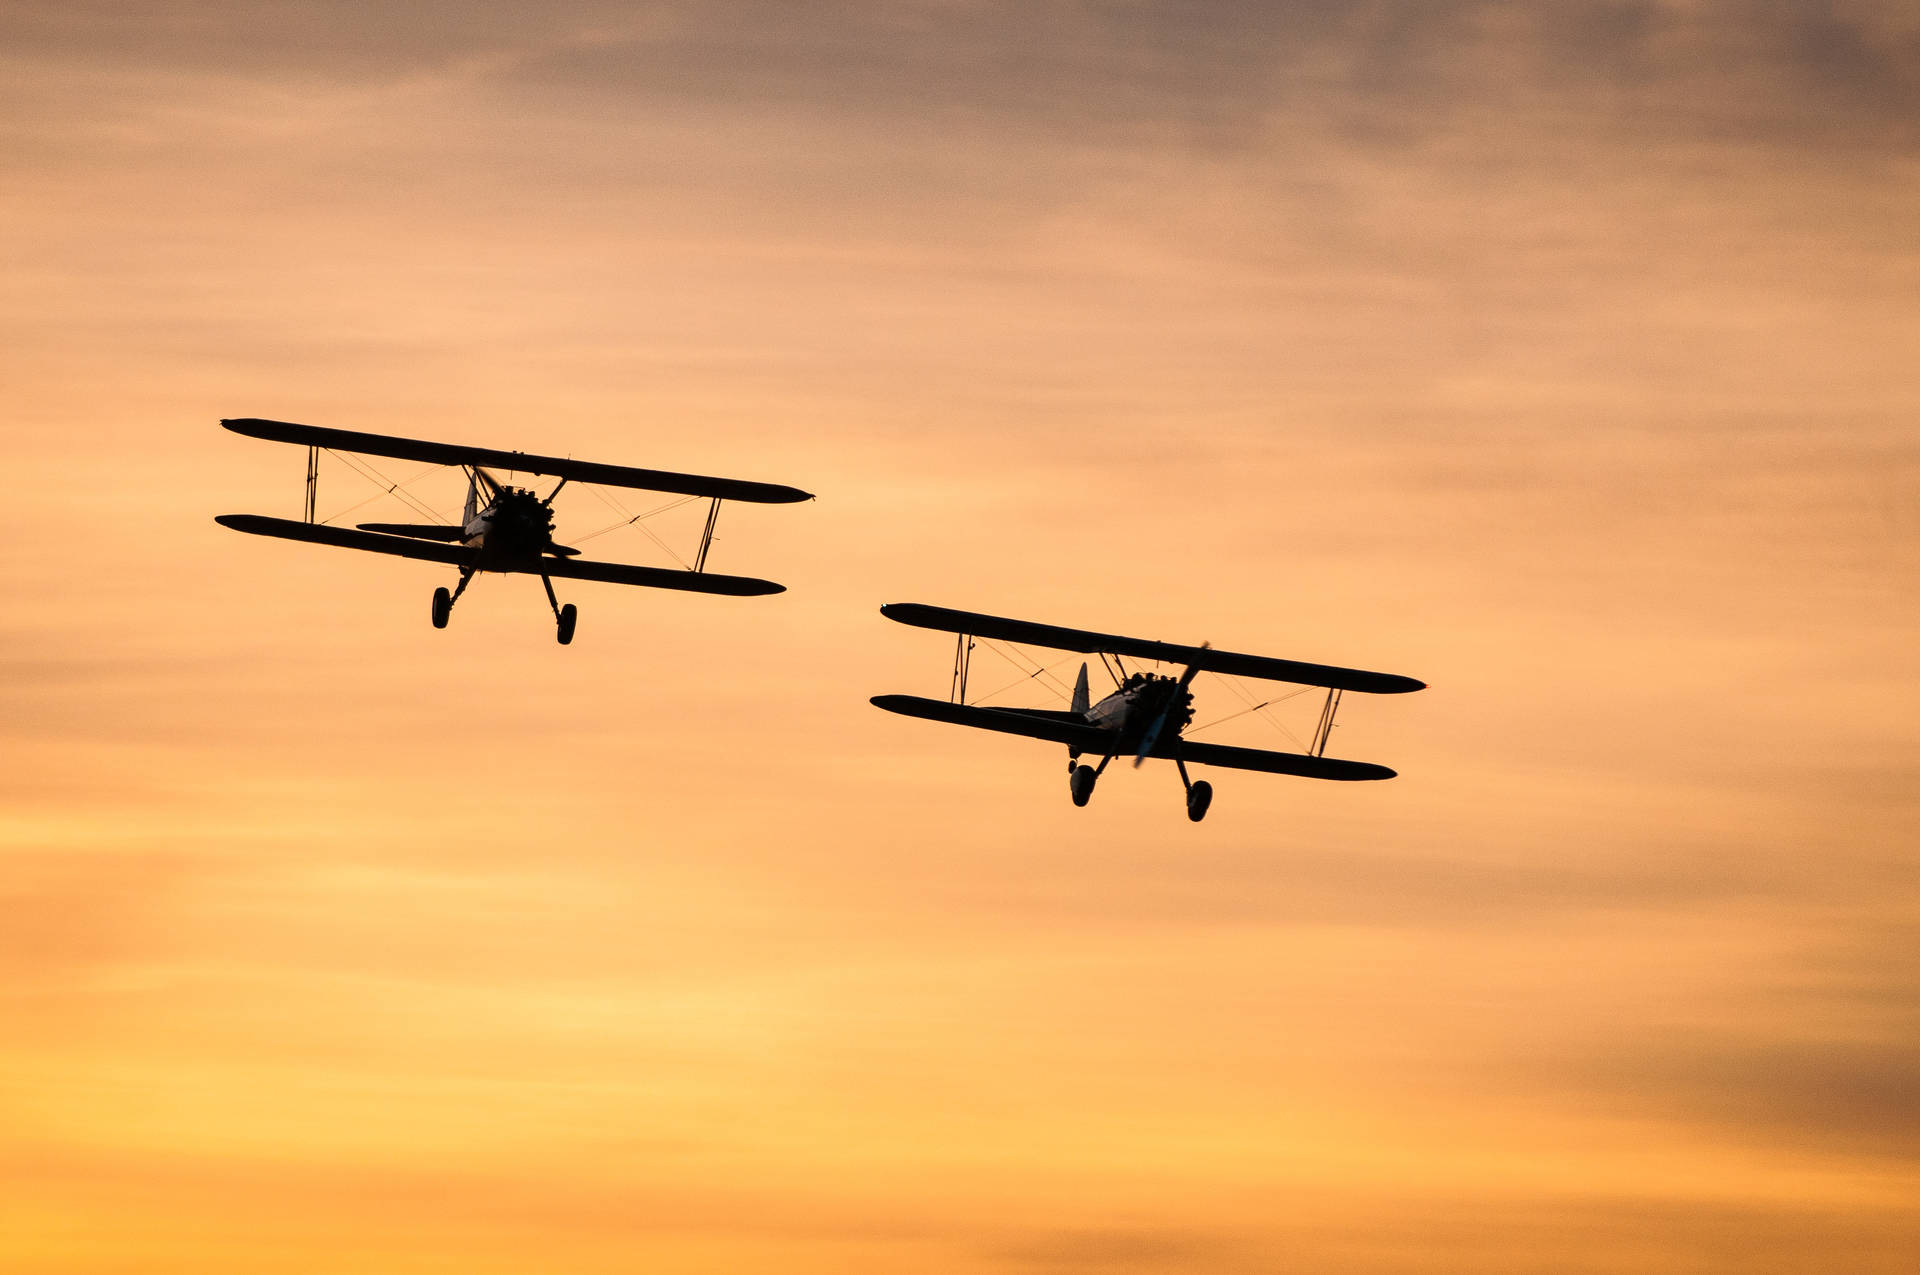 Small Planes In Sunset Sky Background